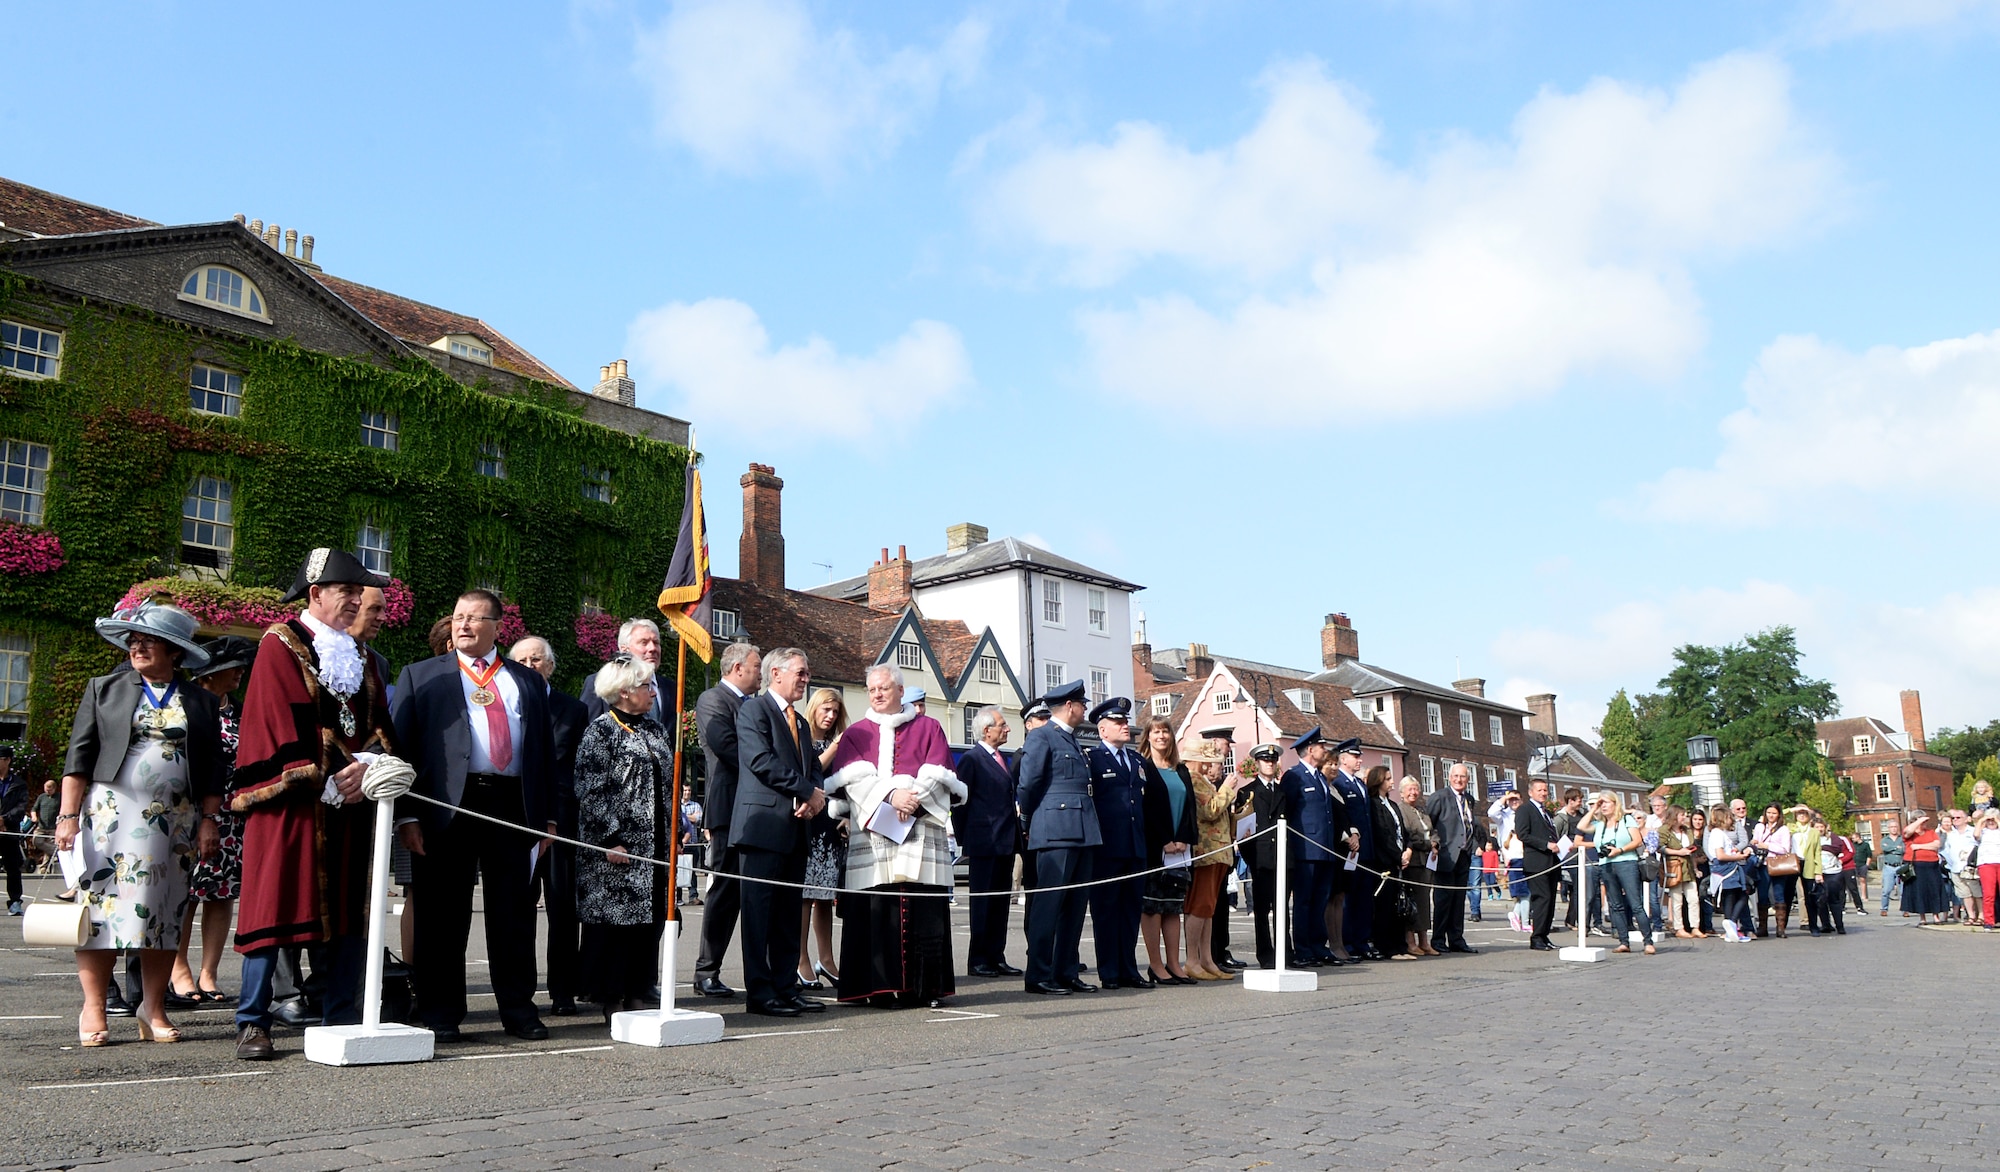 Veterans, community leaders and members of the armed forces prepare for the Battle of Britain parade Sept. 19, 2016, in Bury St. Edmunds, England. The Battle of Britain is a historical event during that occurred World War II during which the Royal Air Force defended the U.K. against the German air force, Luftwaffe, in 1940. (U.S. Air Force photo by Airman 1st Class Tenley Long)